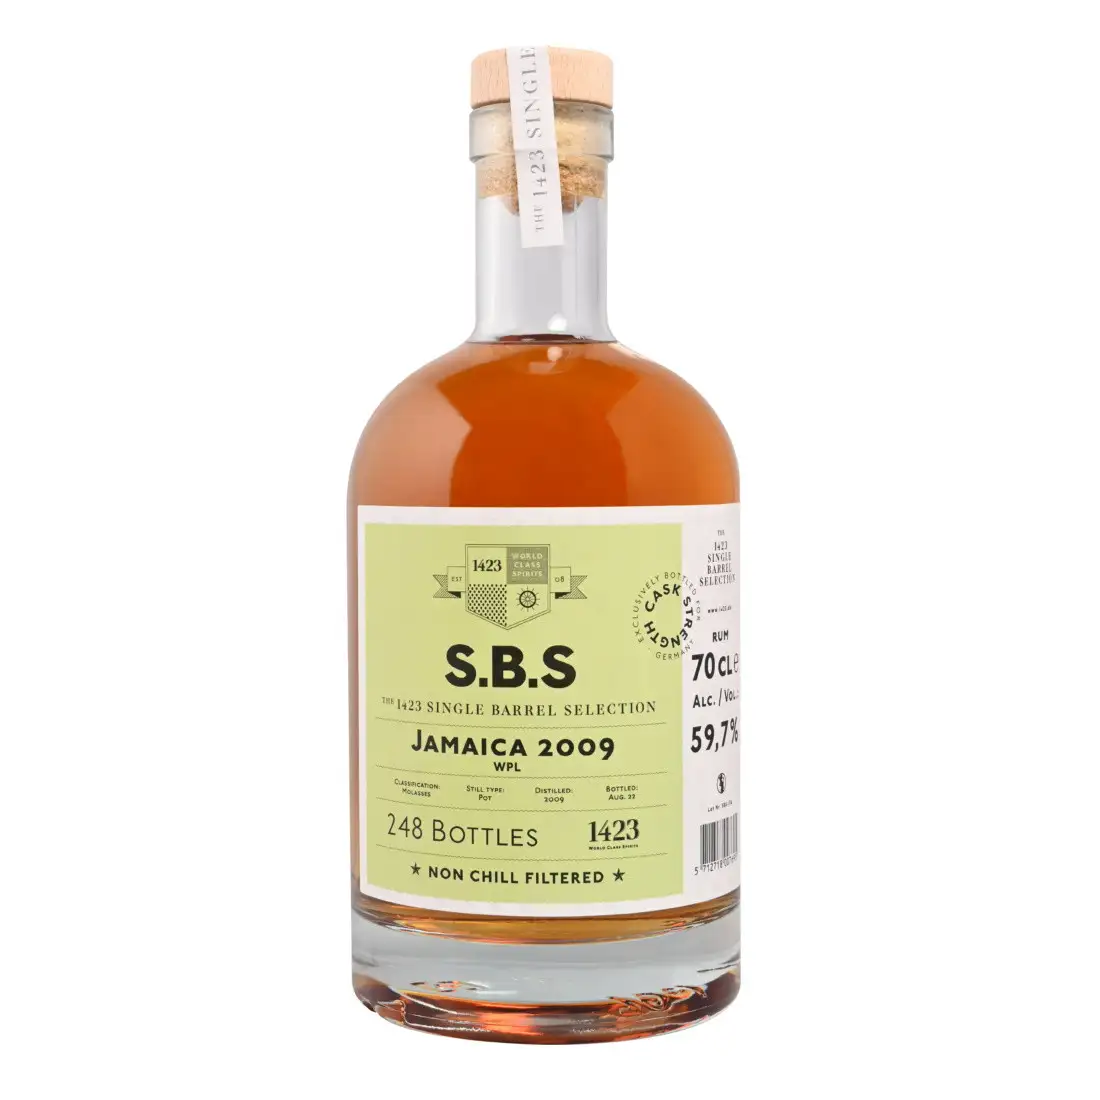 Image of the front of the bottle of the rum S.B.S Jamaica WPL